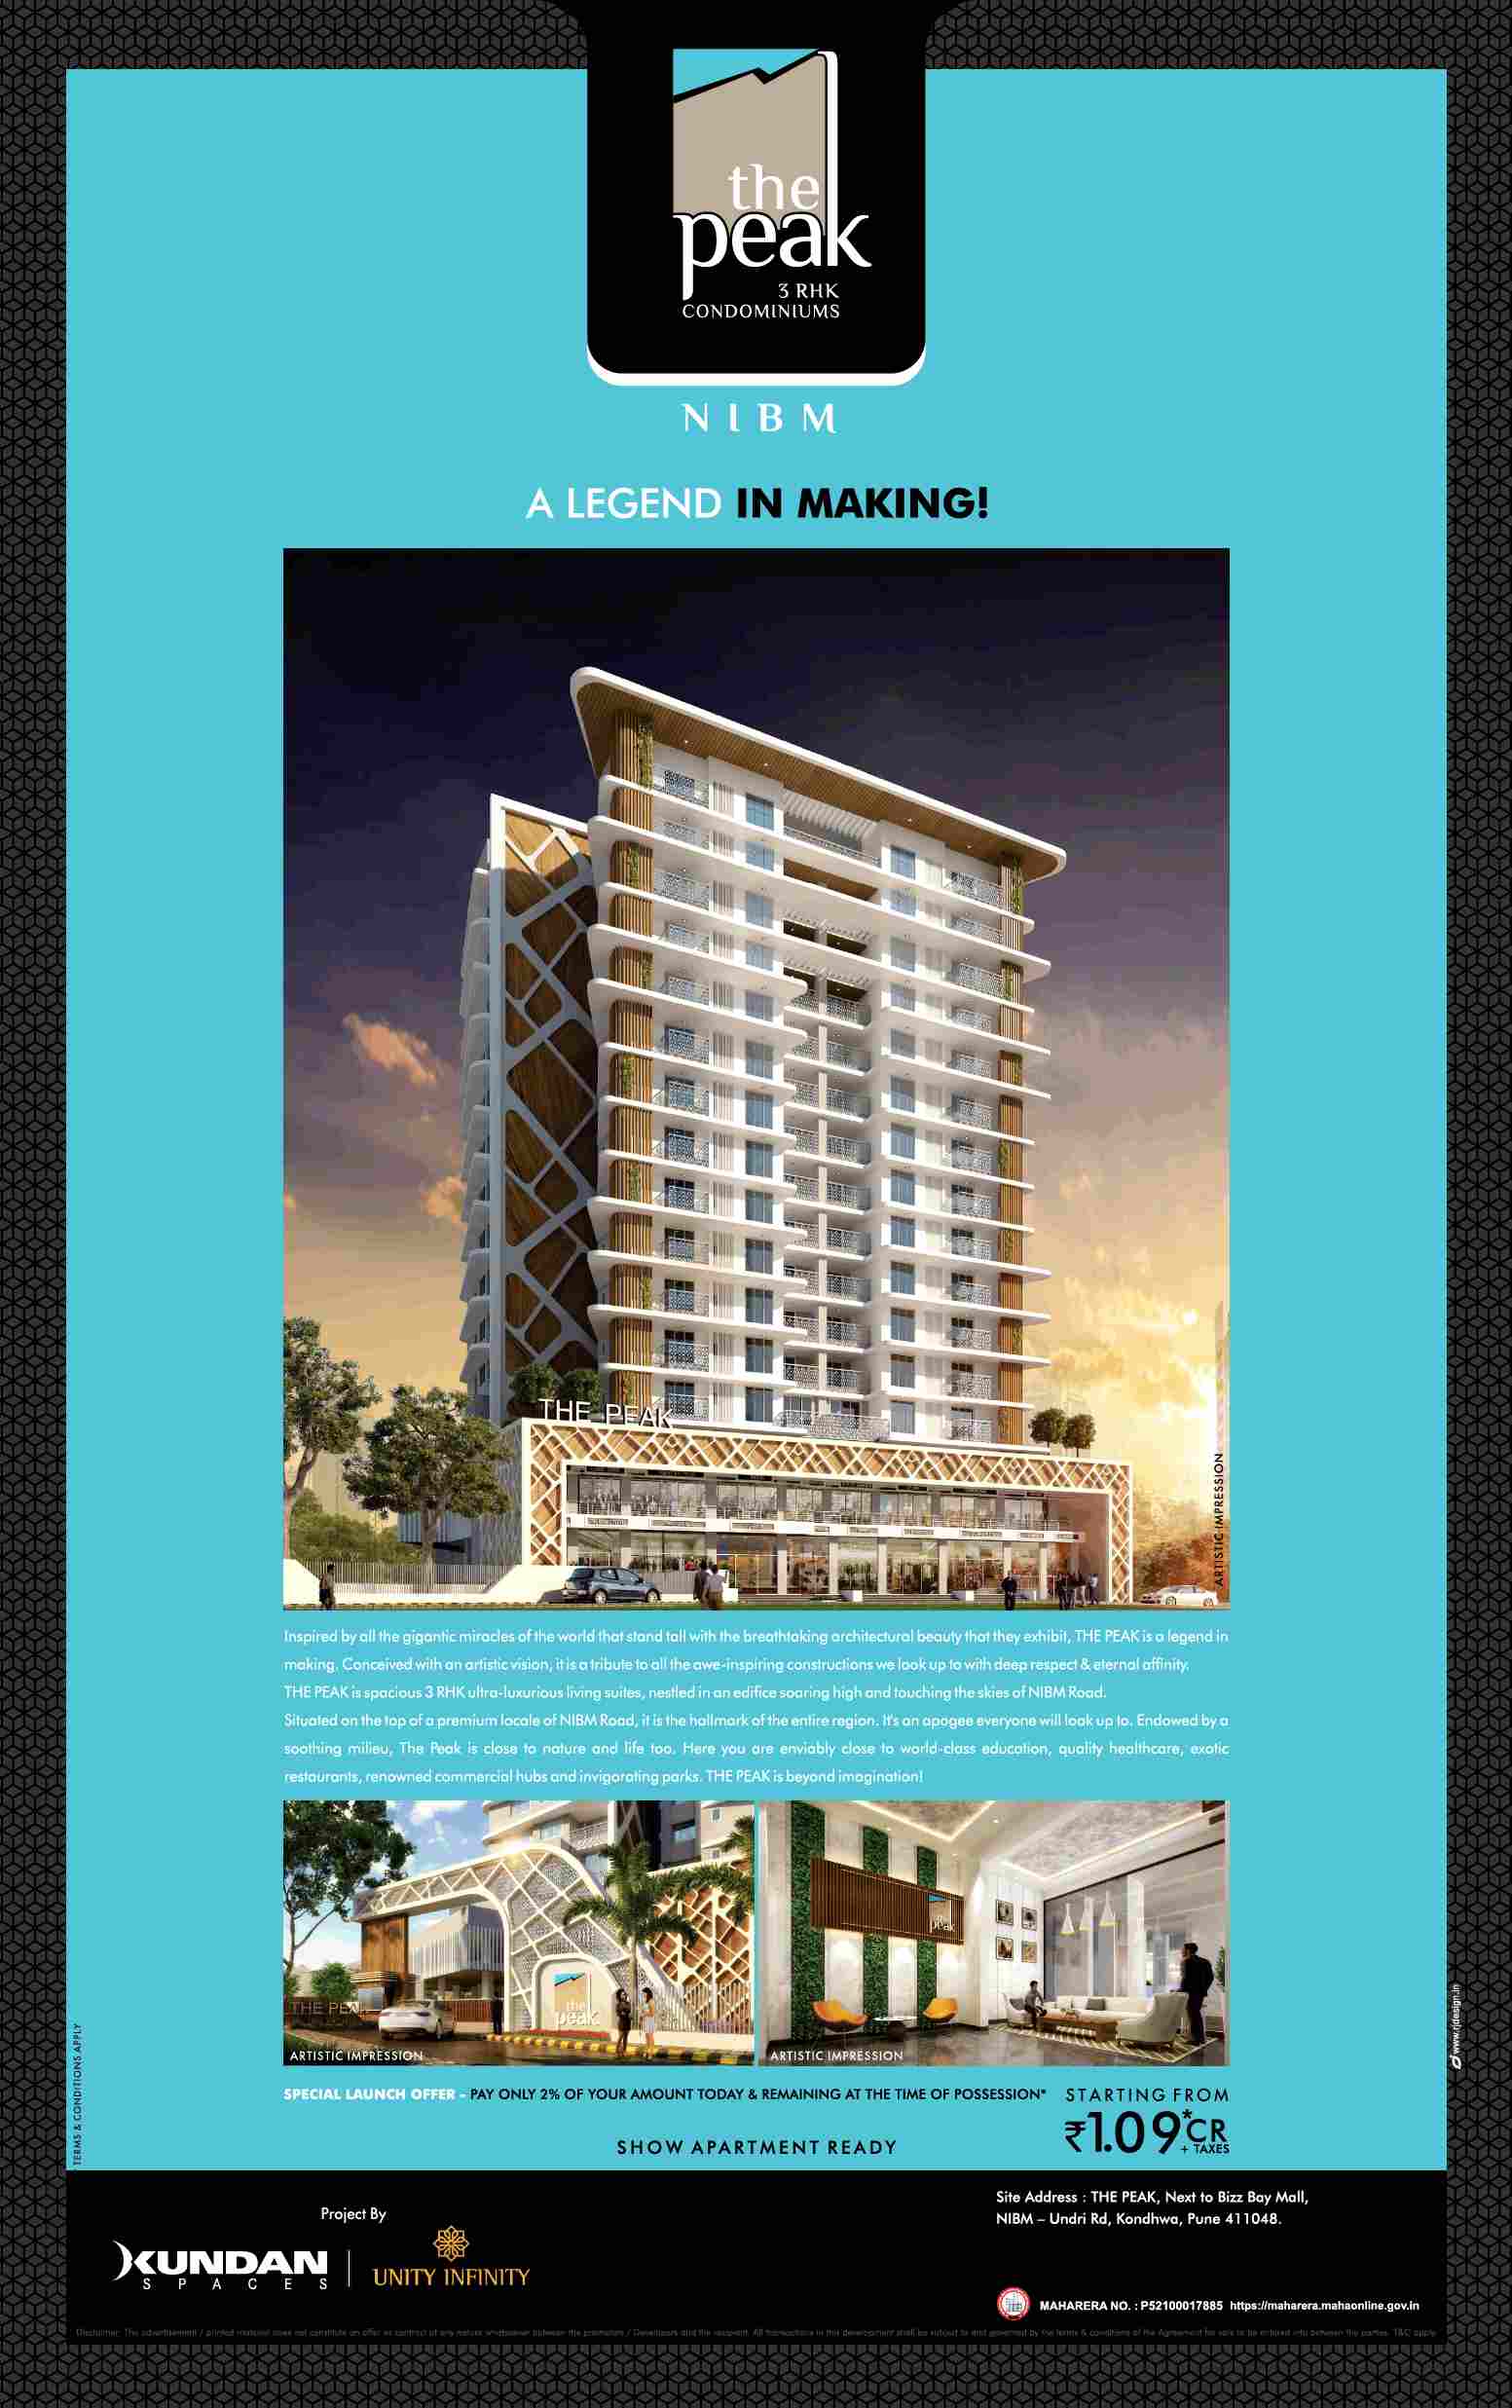 Pay only 2% & remaining on possession at Kundan The Peak in Pune Update